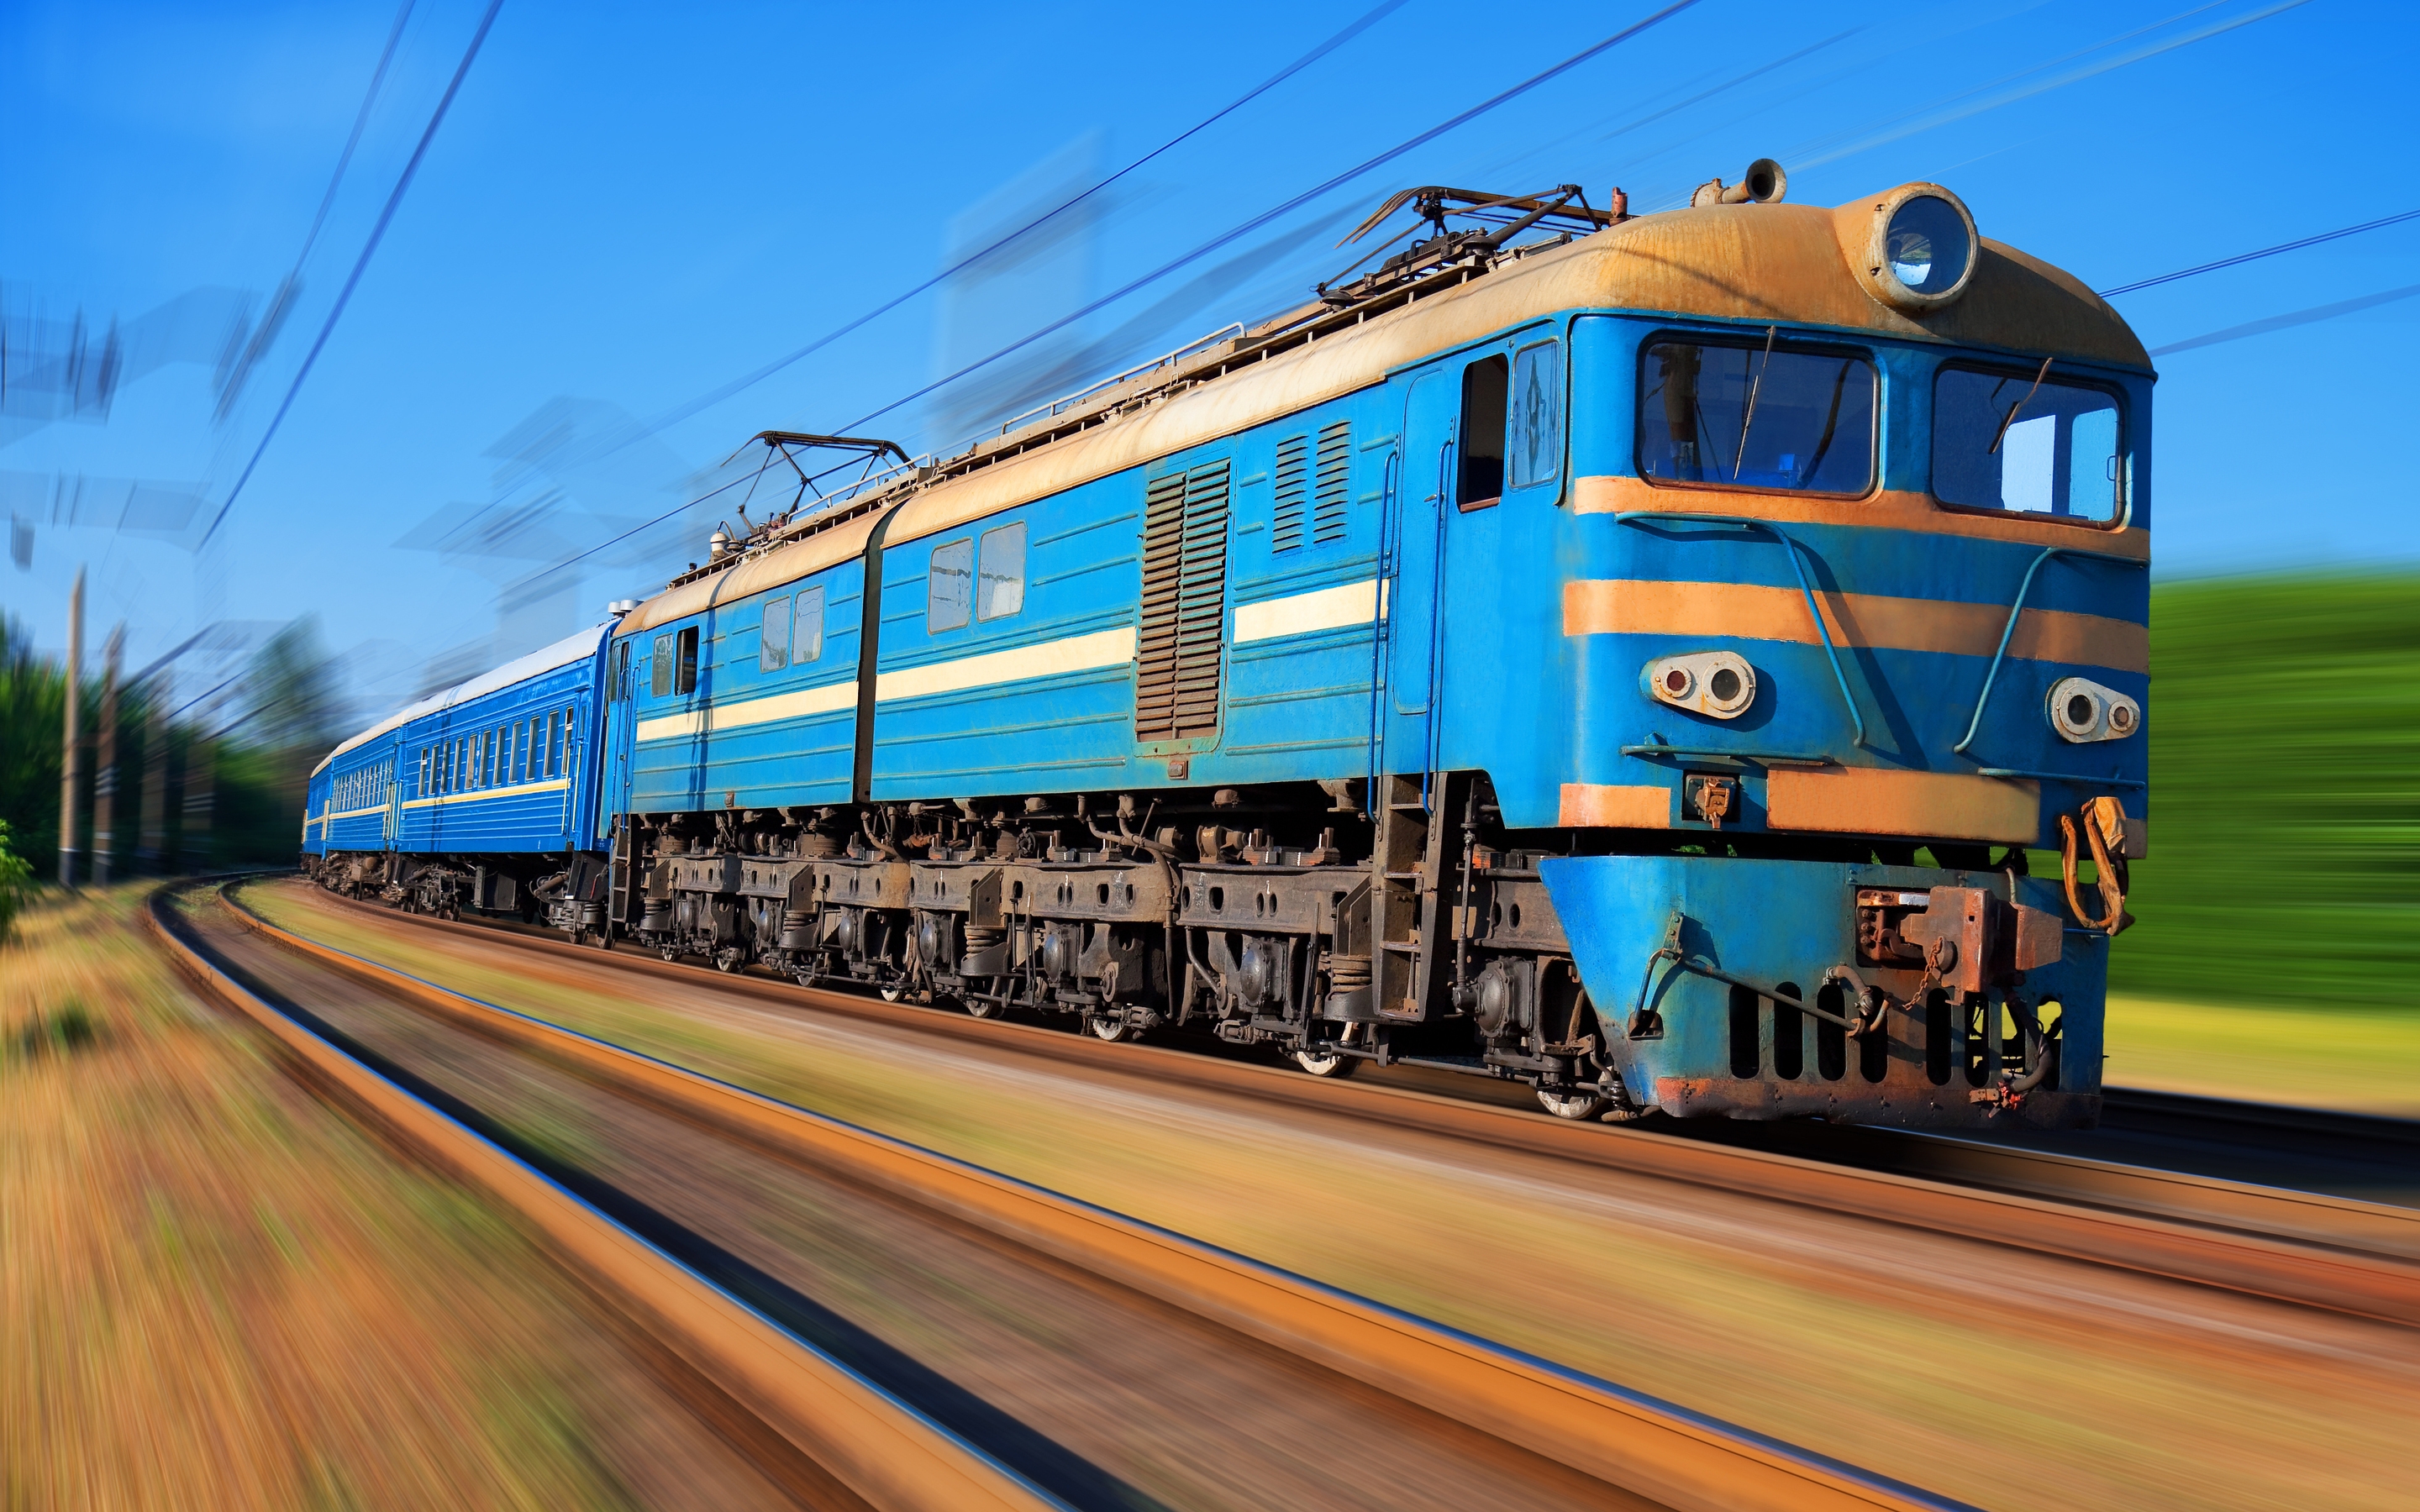 Old Blue Train for 2880 x 1800 Retina Display resolution